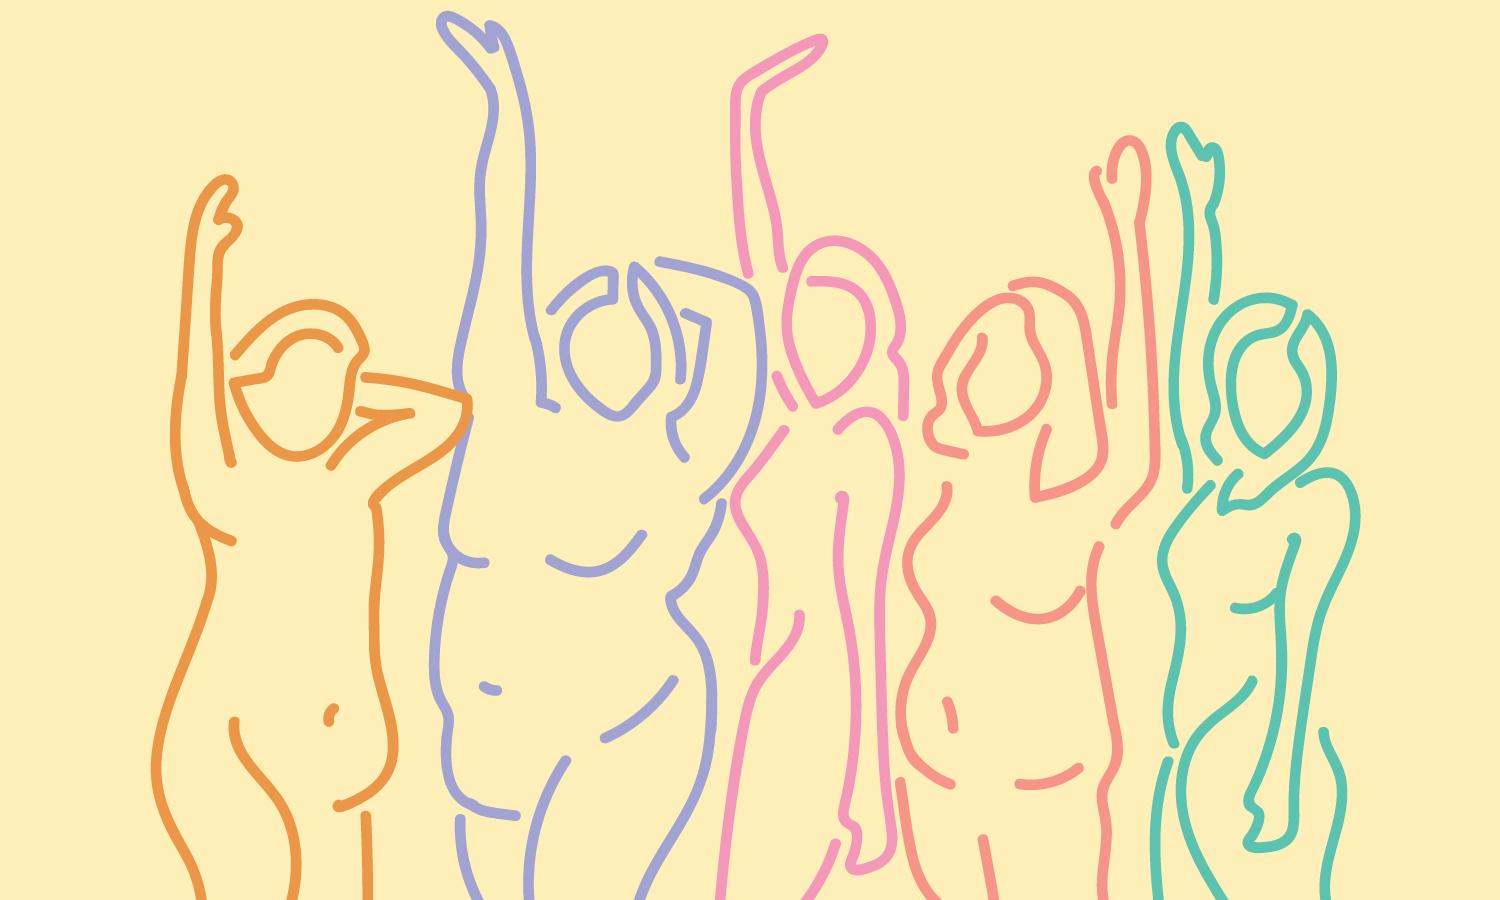 Colorful graphic line art depicting different body shapes for body positivity